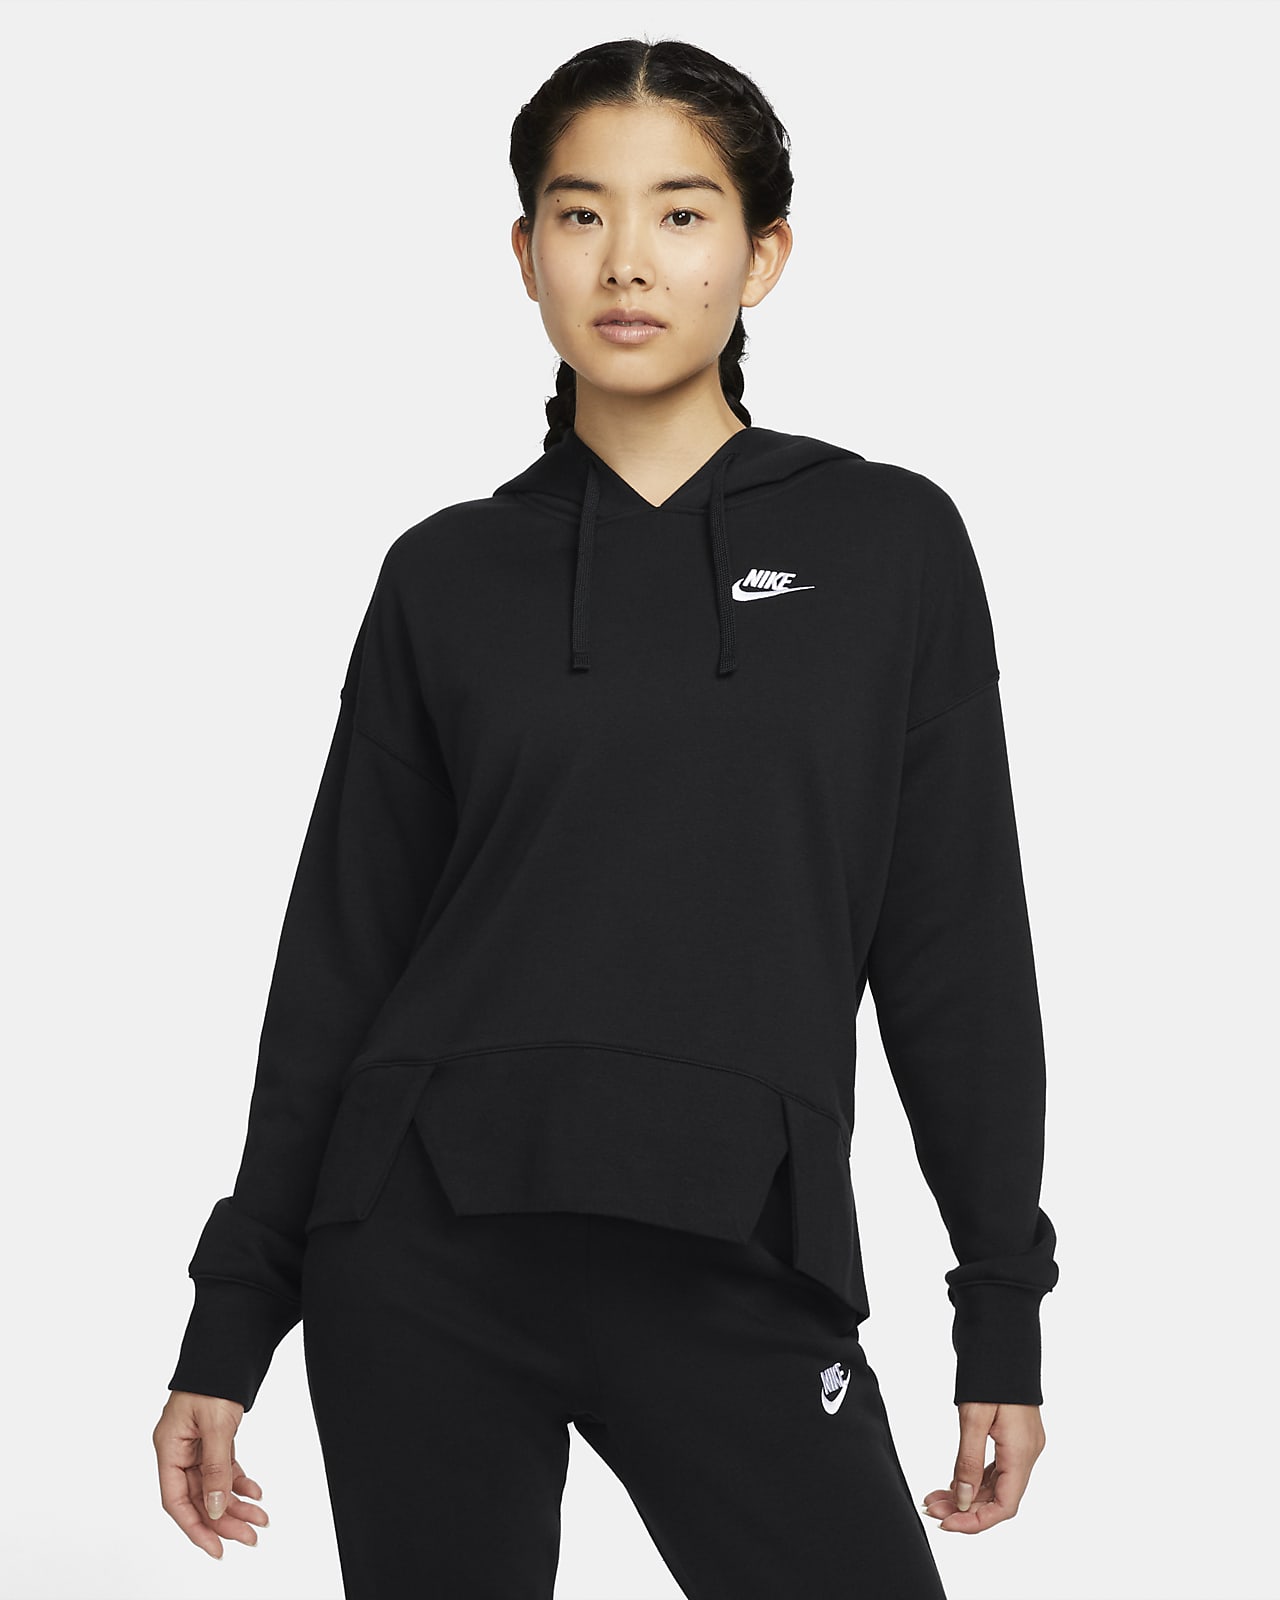 https://static.nike.com/a/images/t_PDP_1280_v1/f_auto,q_auto:eco/4d6c1696-2120-4aa1-bd06-f00d5ec39bee/sportswear-club-fleece-oversized-hoodie-zCNxXb.png